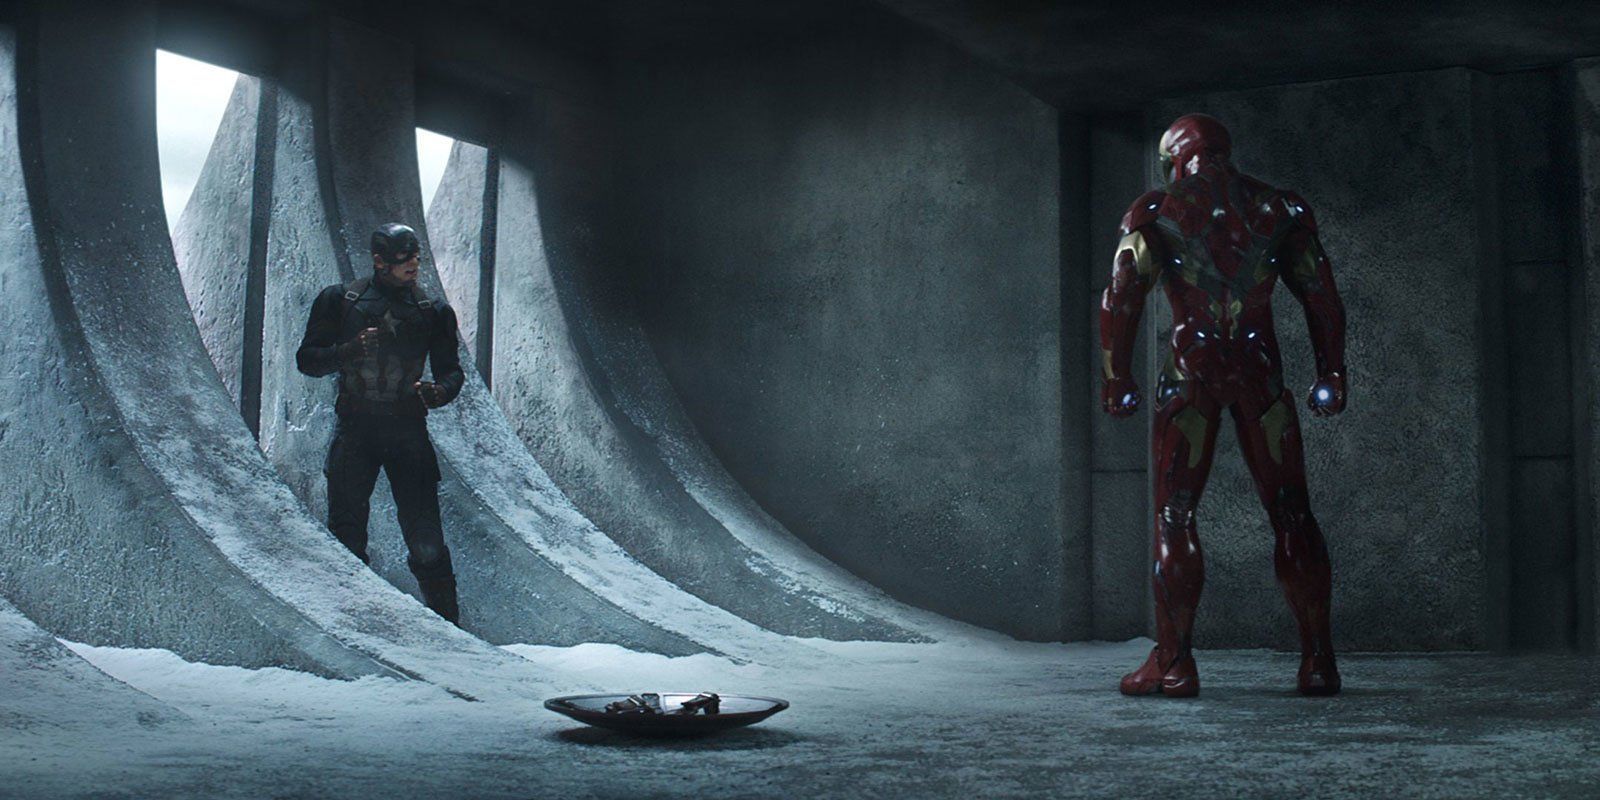 Iron Man and Captain America square off in their Civil War fight